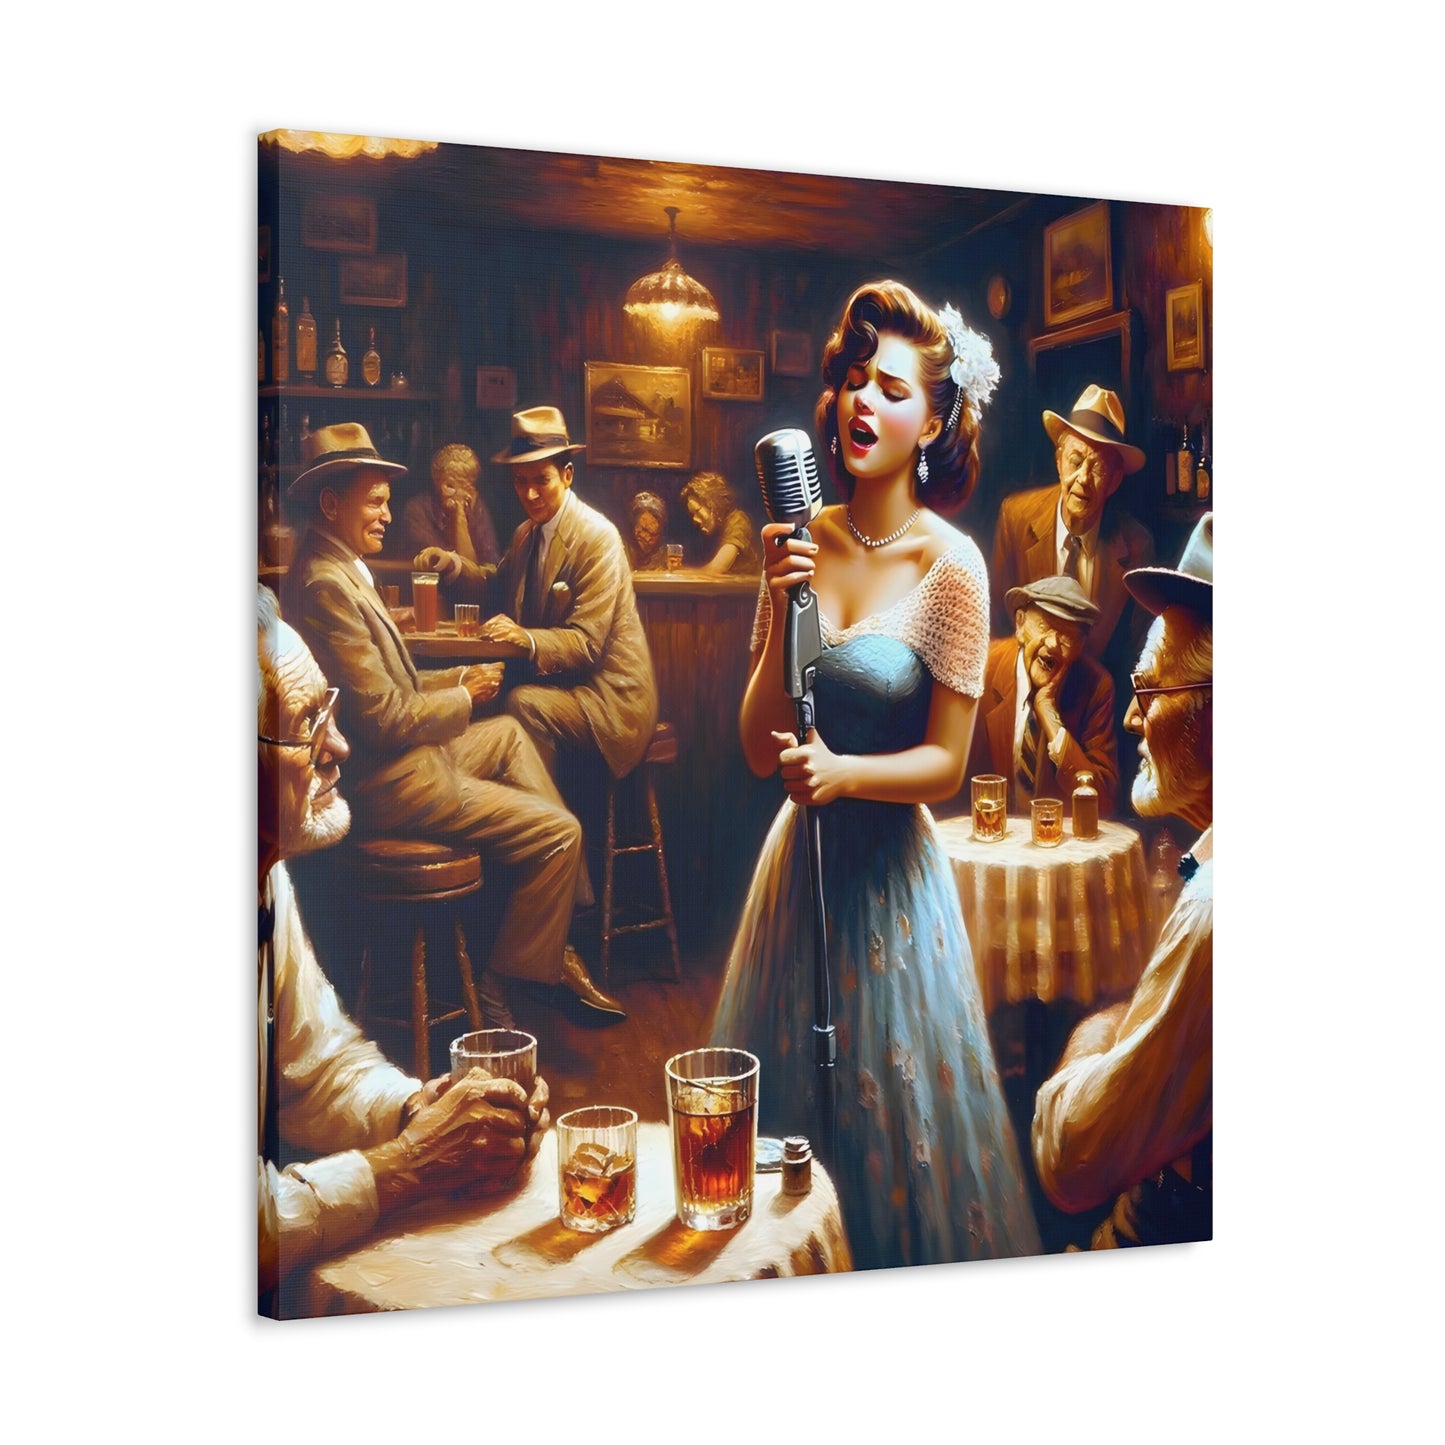 Evelyn Rosseau. The Girl Who Sang the Blues. Exclusive Canvas Print